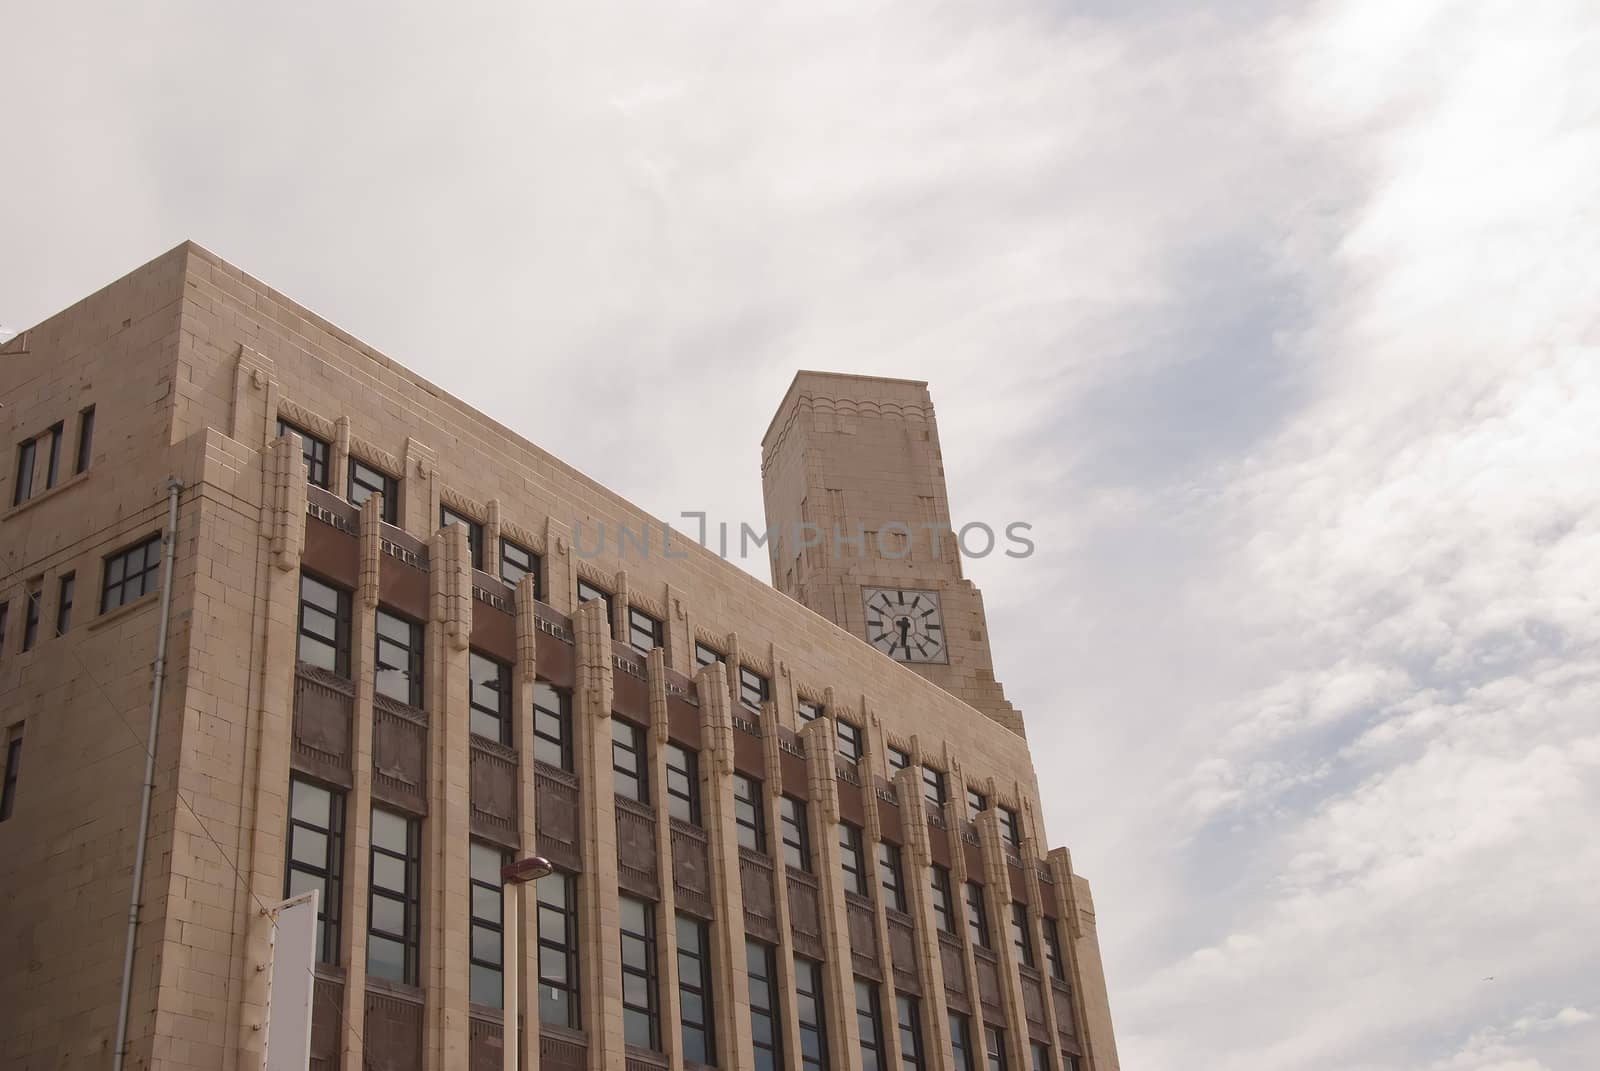 Art Deco Building and Clocktower2 by d40xboy